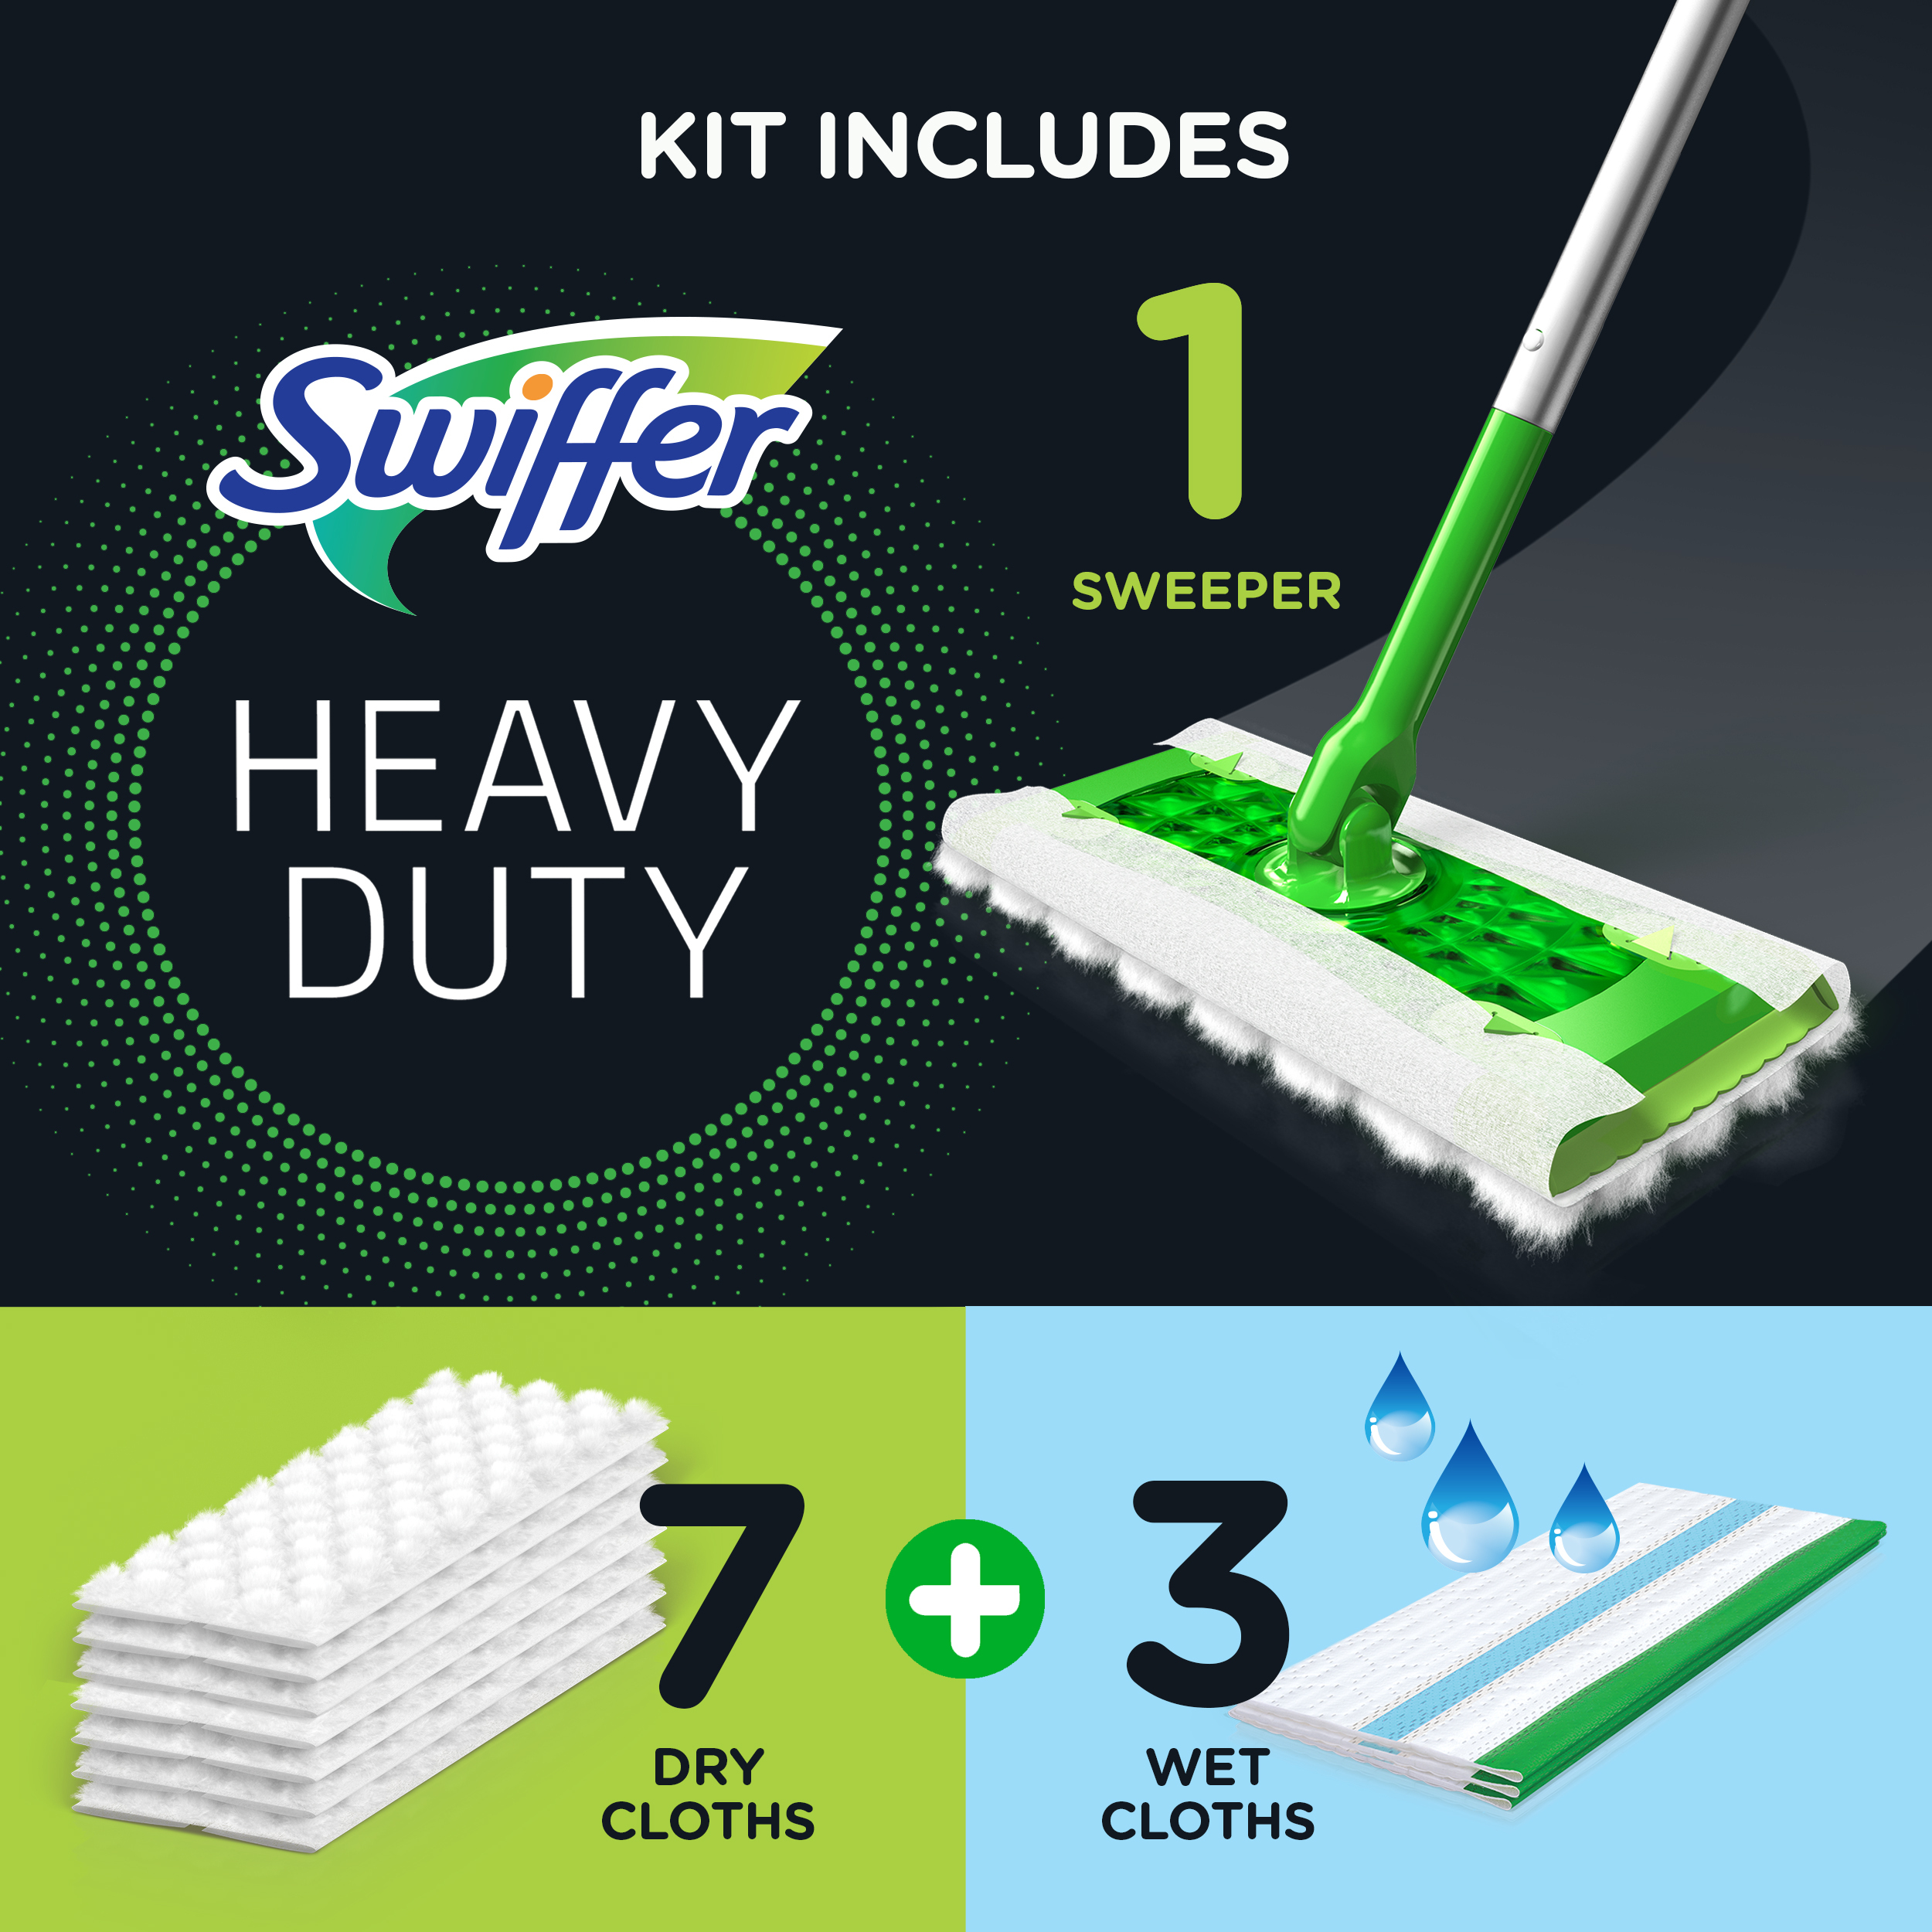 Swiffer Sweeper 2-in-1, Dry and Wet Multi Surface Floor Cleaner and Broom, Sweep and Mop Starter Kit - image 4 of 10